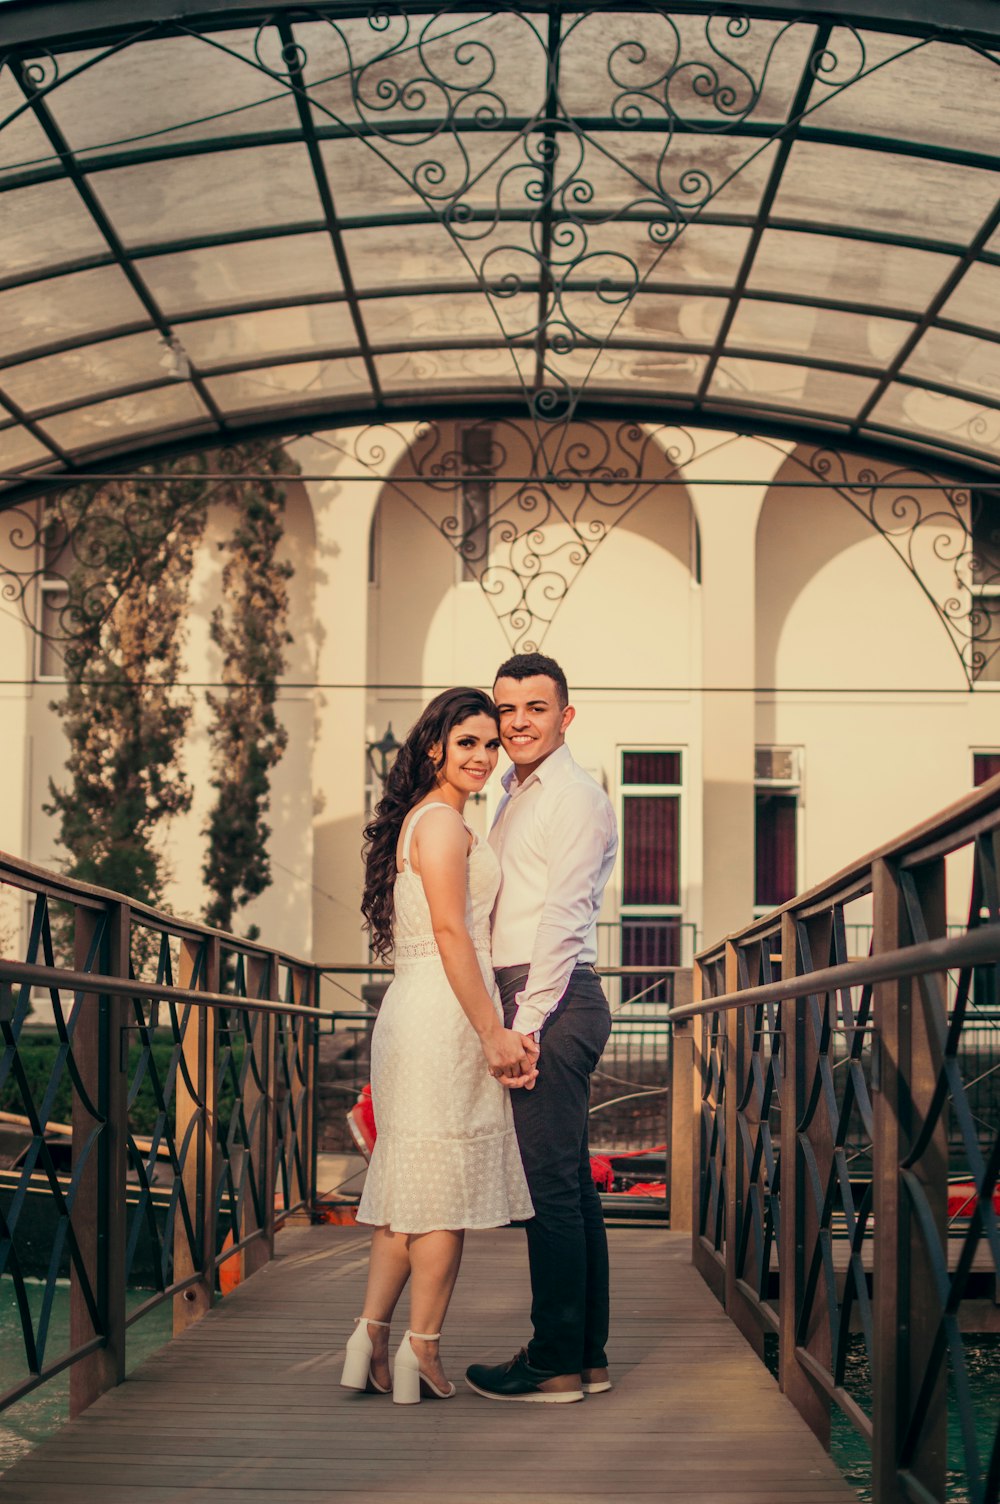 man in white dress shirt and woman in white dress standing on red metal staircase